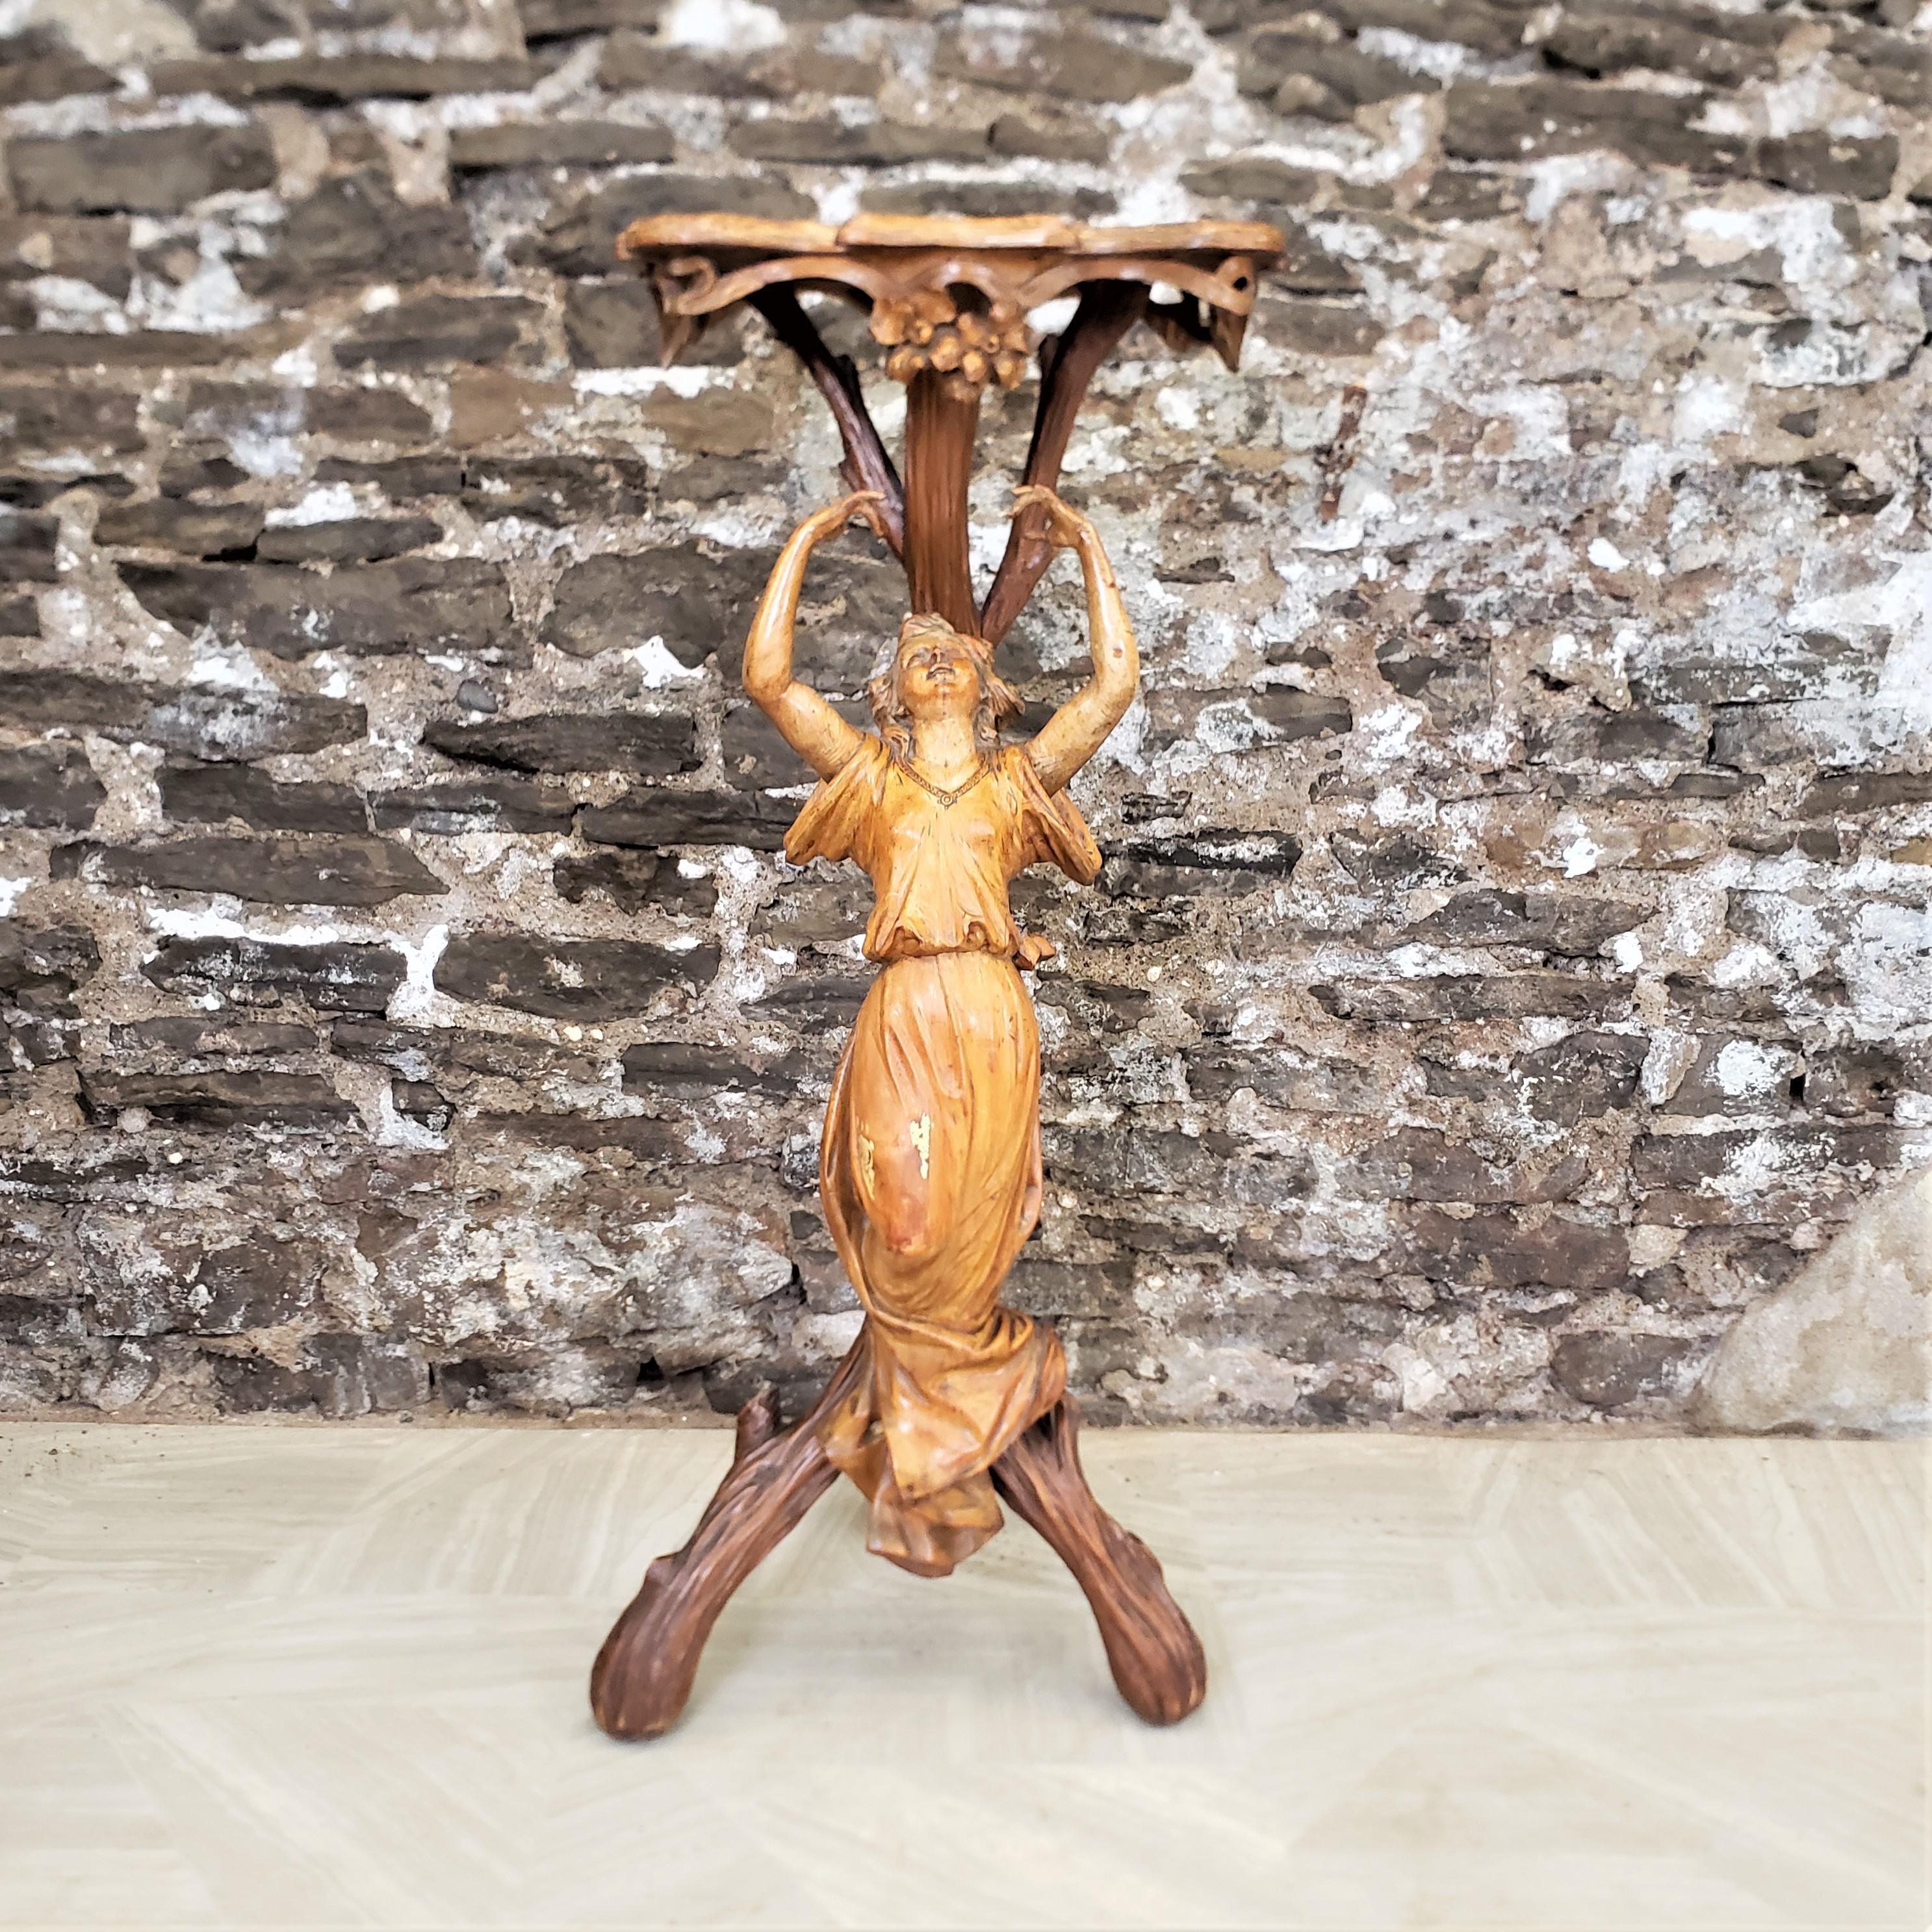 This antique pedestal table is unsigned, but presumed to have originated from Italy and date to approximately 1900 and done in the period Art Nouveau style. The table is composed of a grape vine wooden base with a hand-carved woman with outstretched